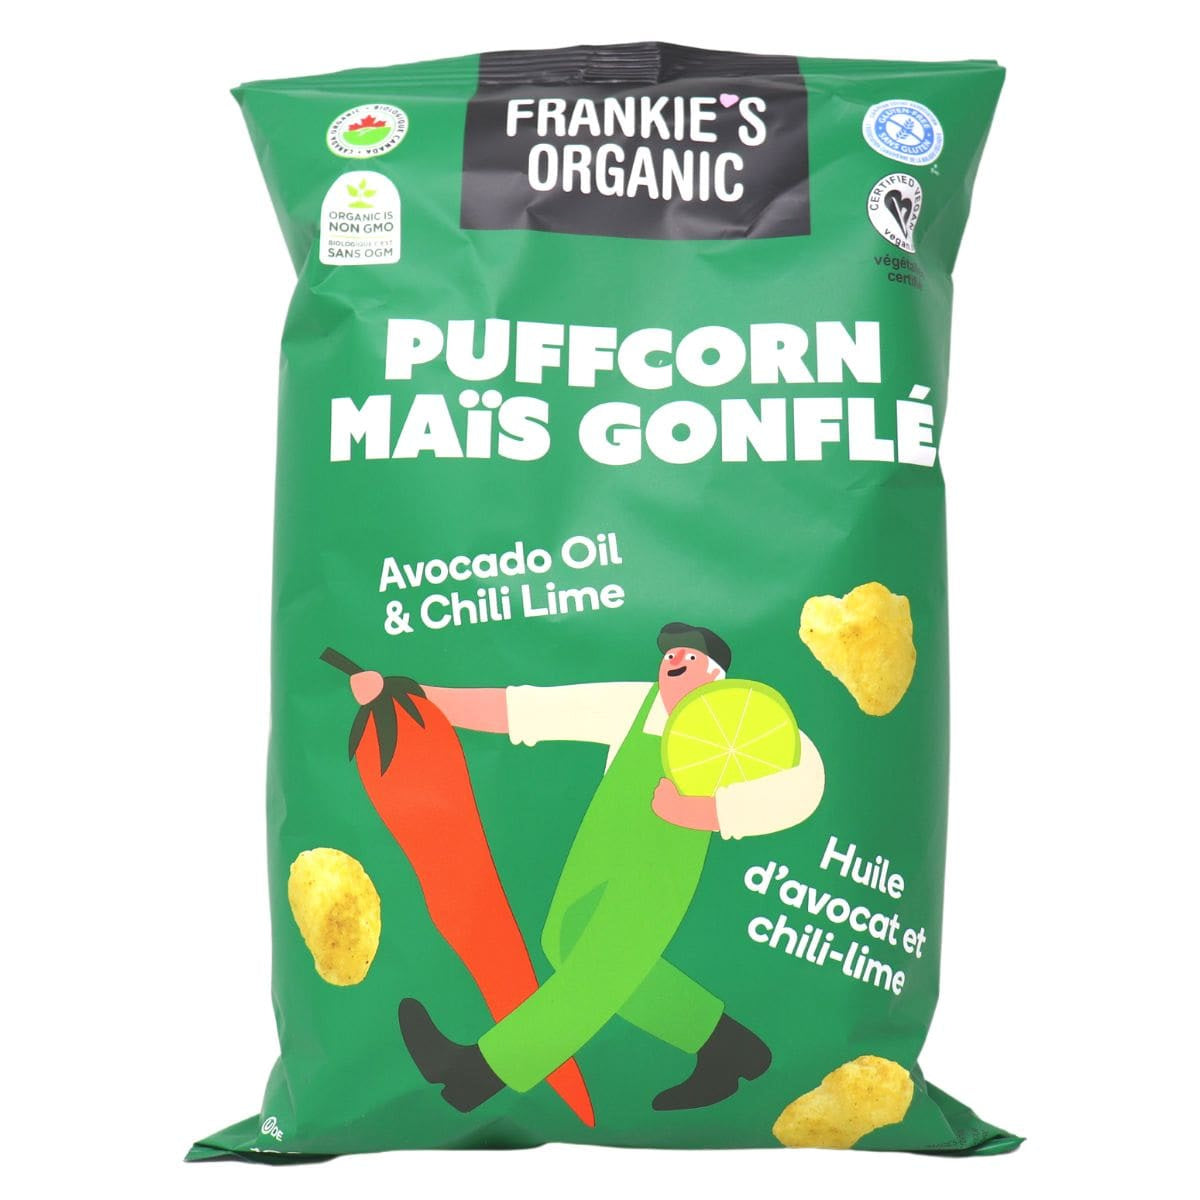 Green package of Frankie's Organic Avocado Oil & Chili Lime Puffcorn.